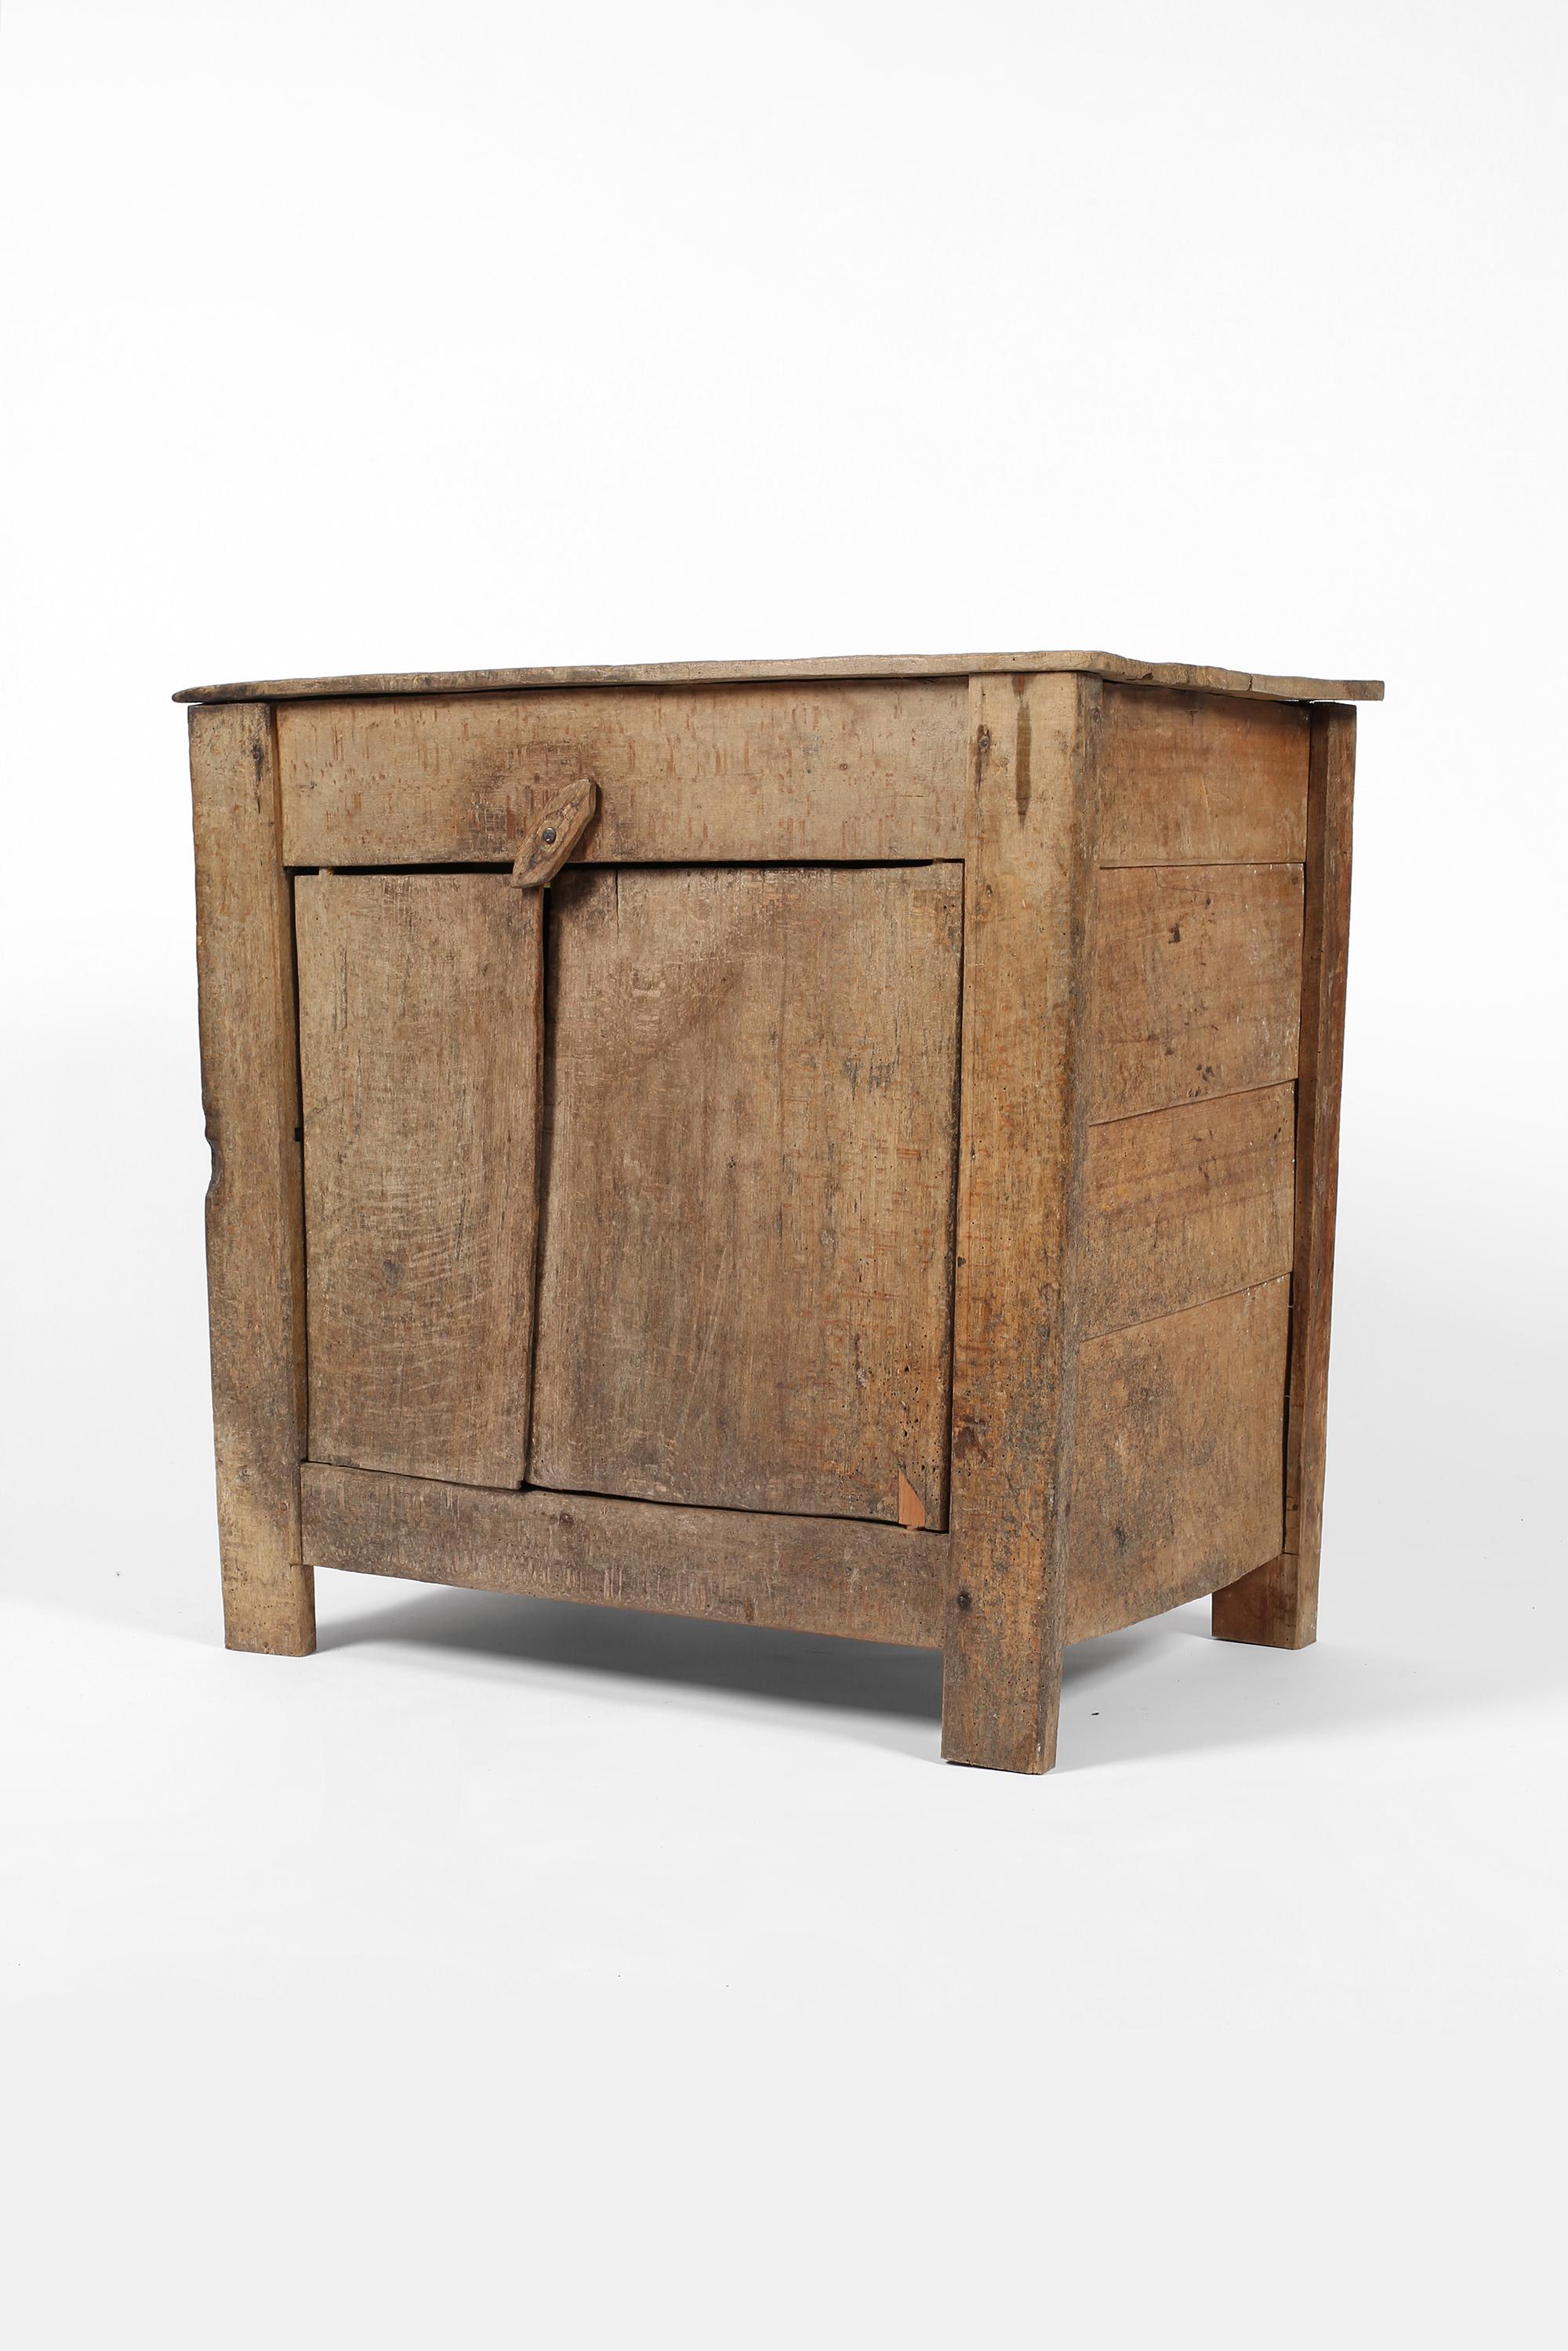 An early 19th century primitive low mountain cupboard in hewn beech, with planked top and two doors which open to reveal a single shelf within. Central European, c. 1800.